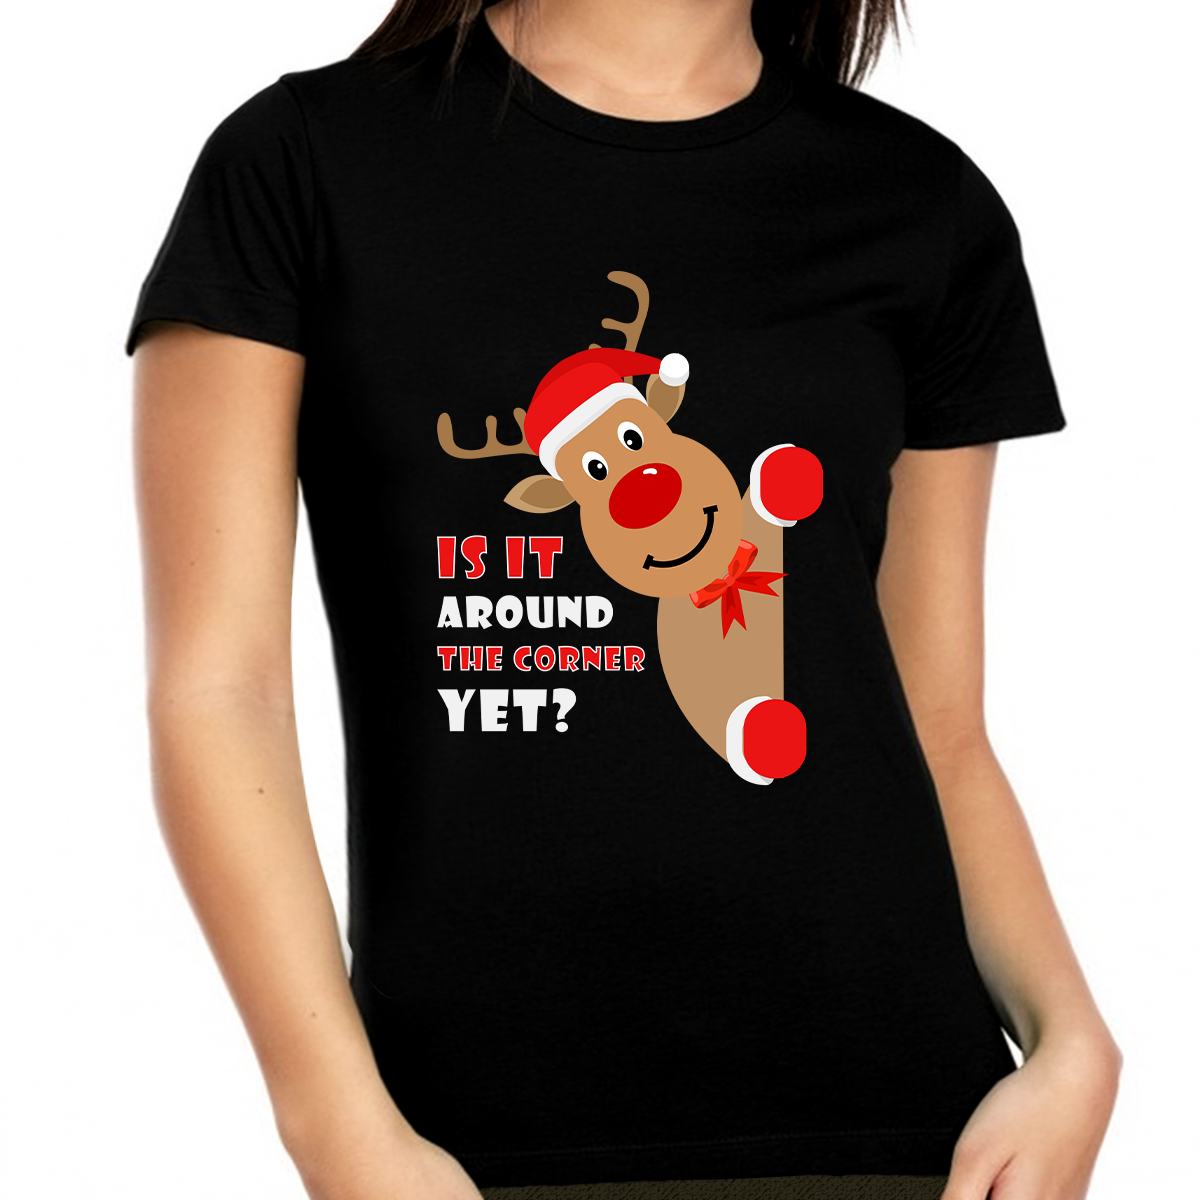 Funny Plus Size Christmas Shirts for Women Plus Size Christmas Tshirts Cute Reindeer Christmas Shirt